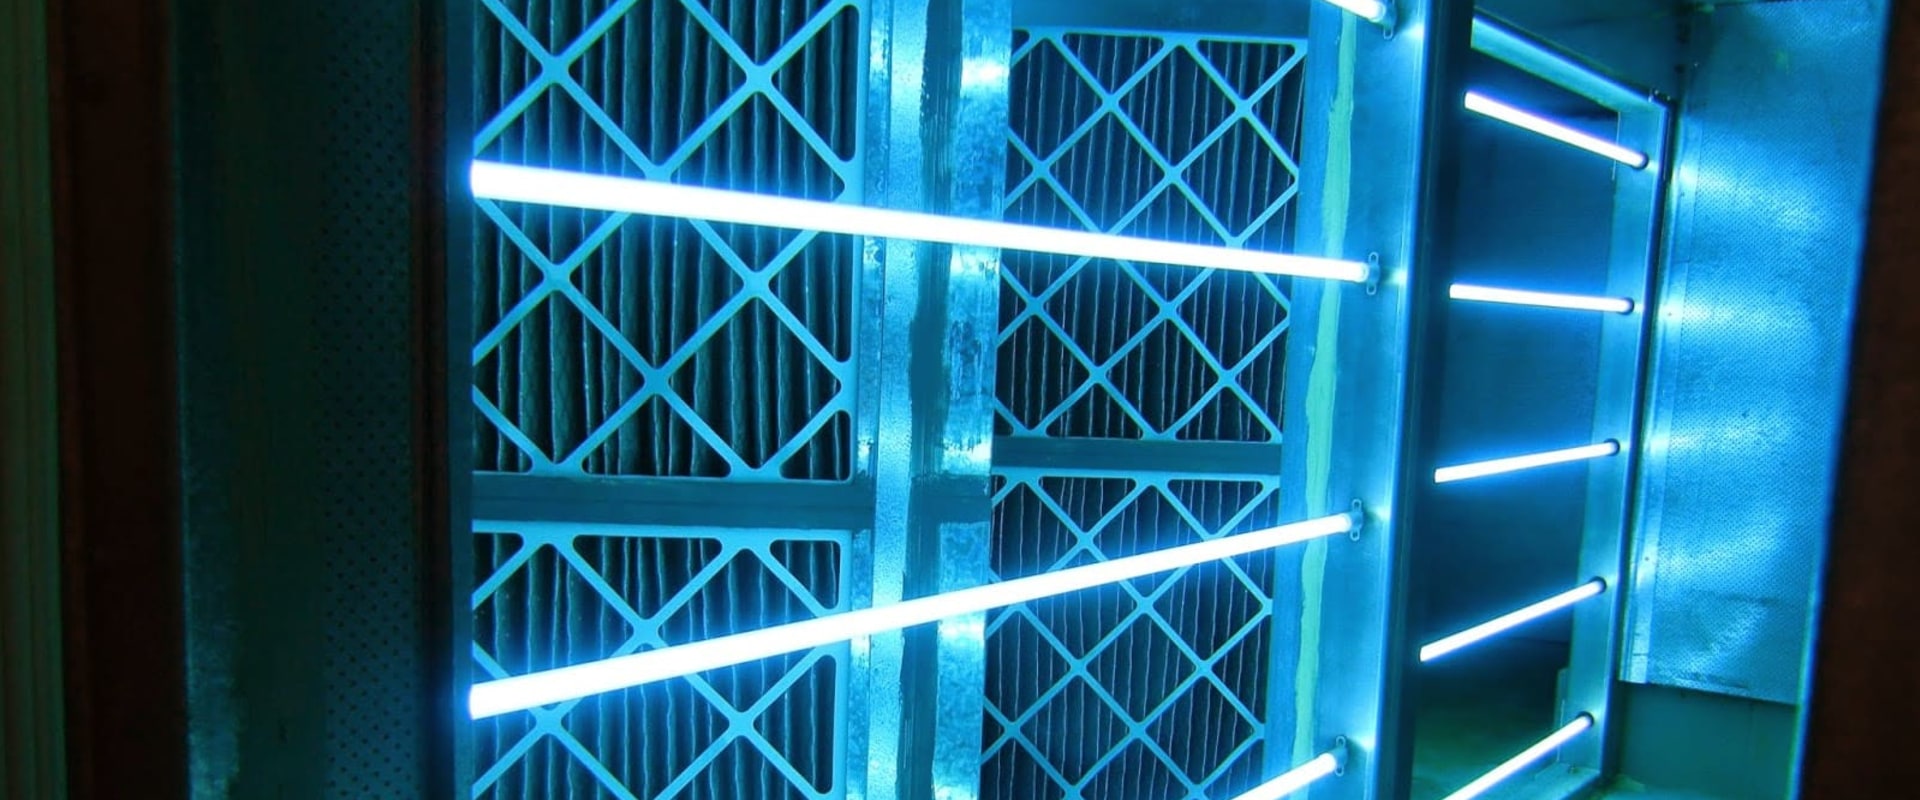 UV Light Installation in West Palm Beach, Florida: What You Need to Know